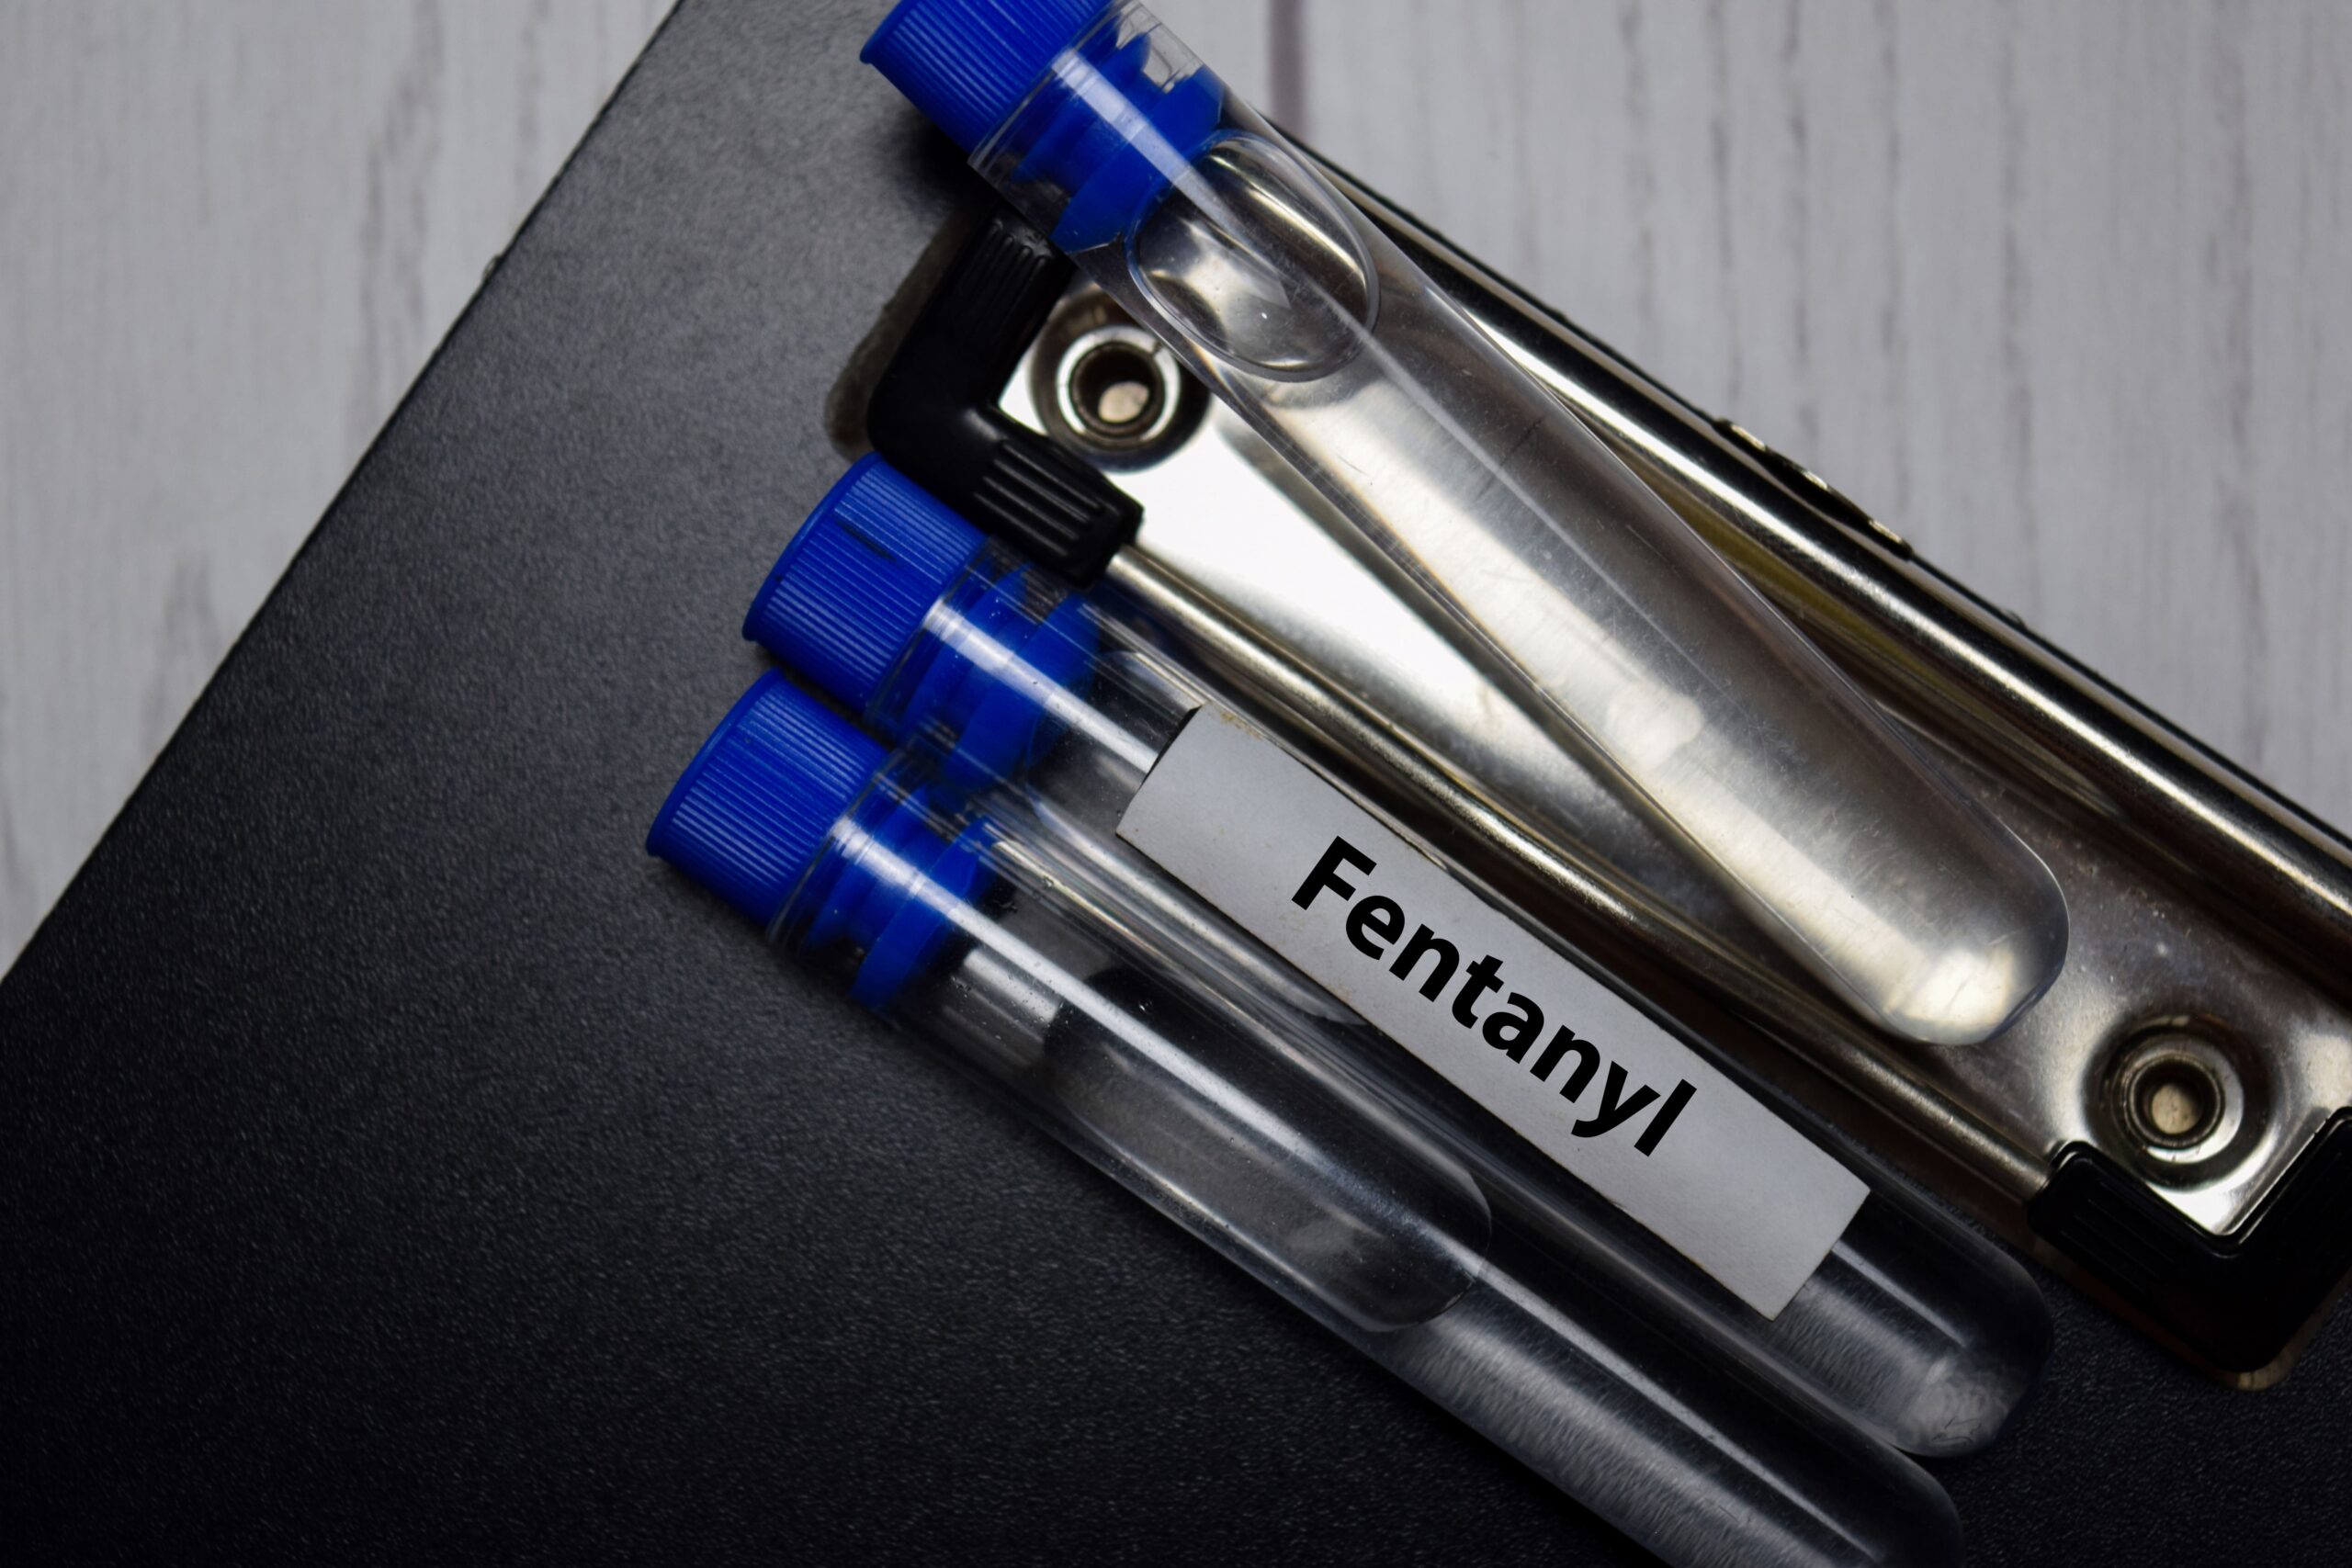 The Facts About Fentanyl Test Strips